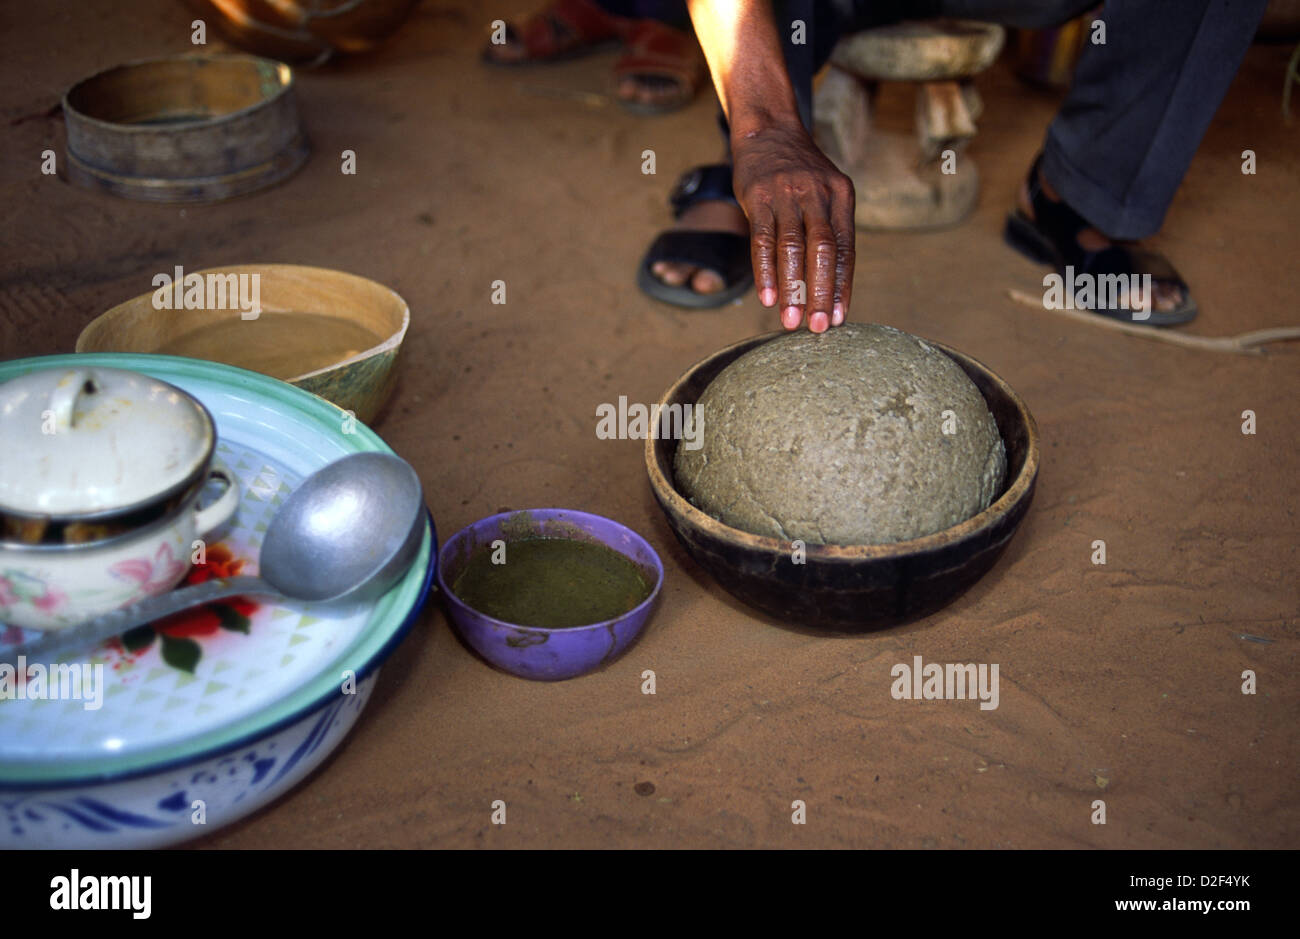 Meals are eaten with fingers in Mali, Africa. To is a millet-based dough eaten with a green okra sauce or gumbo Stock Photo